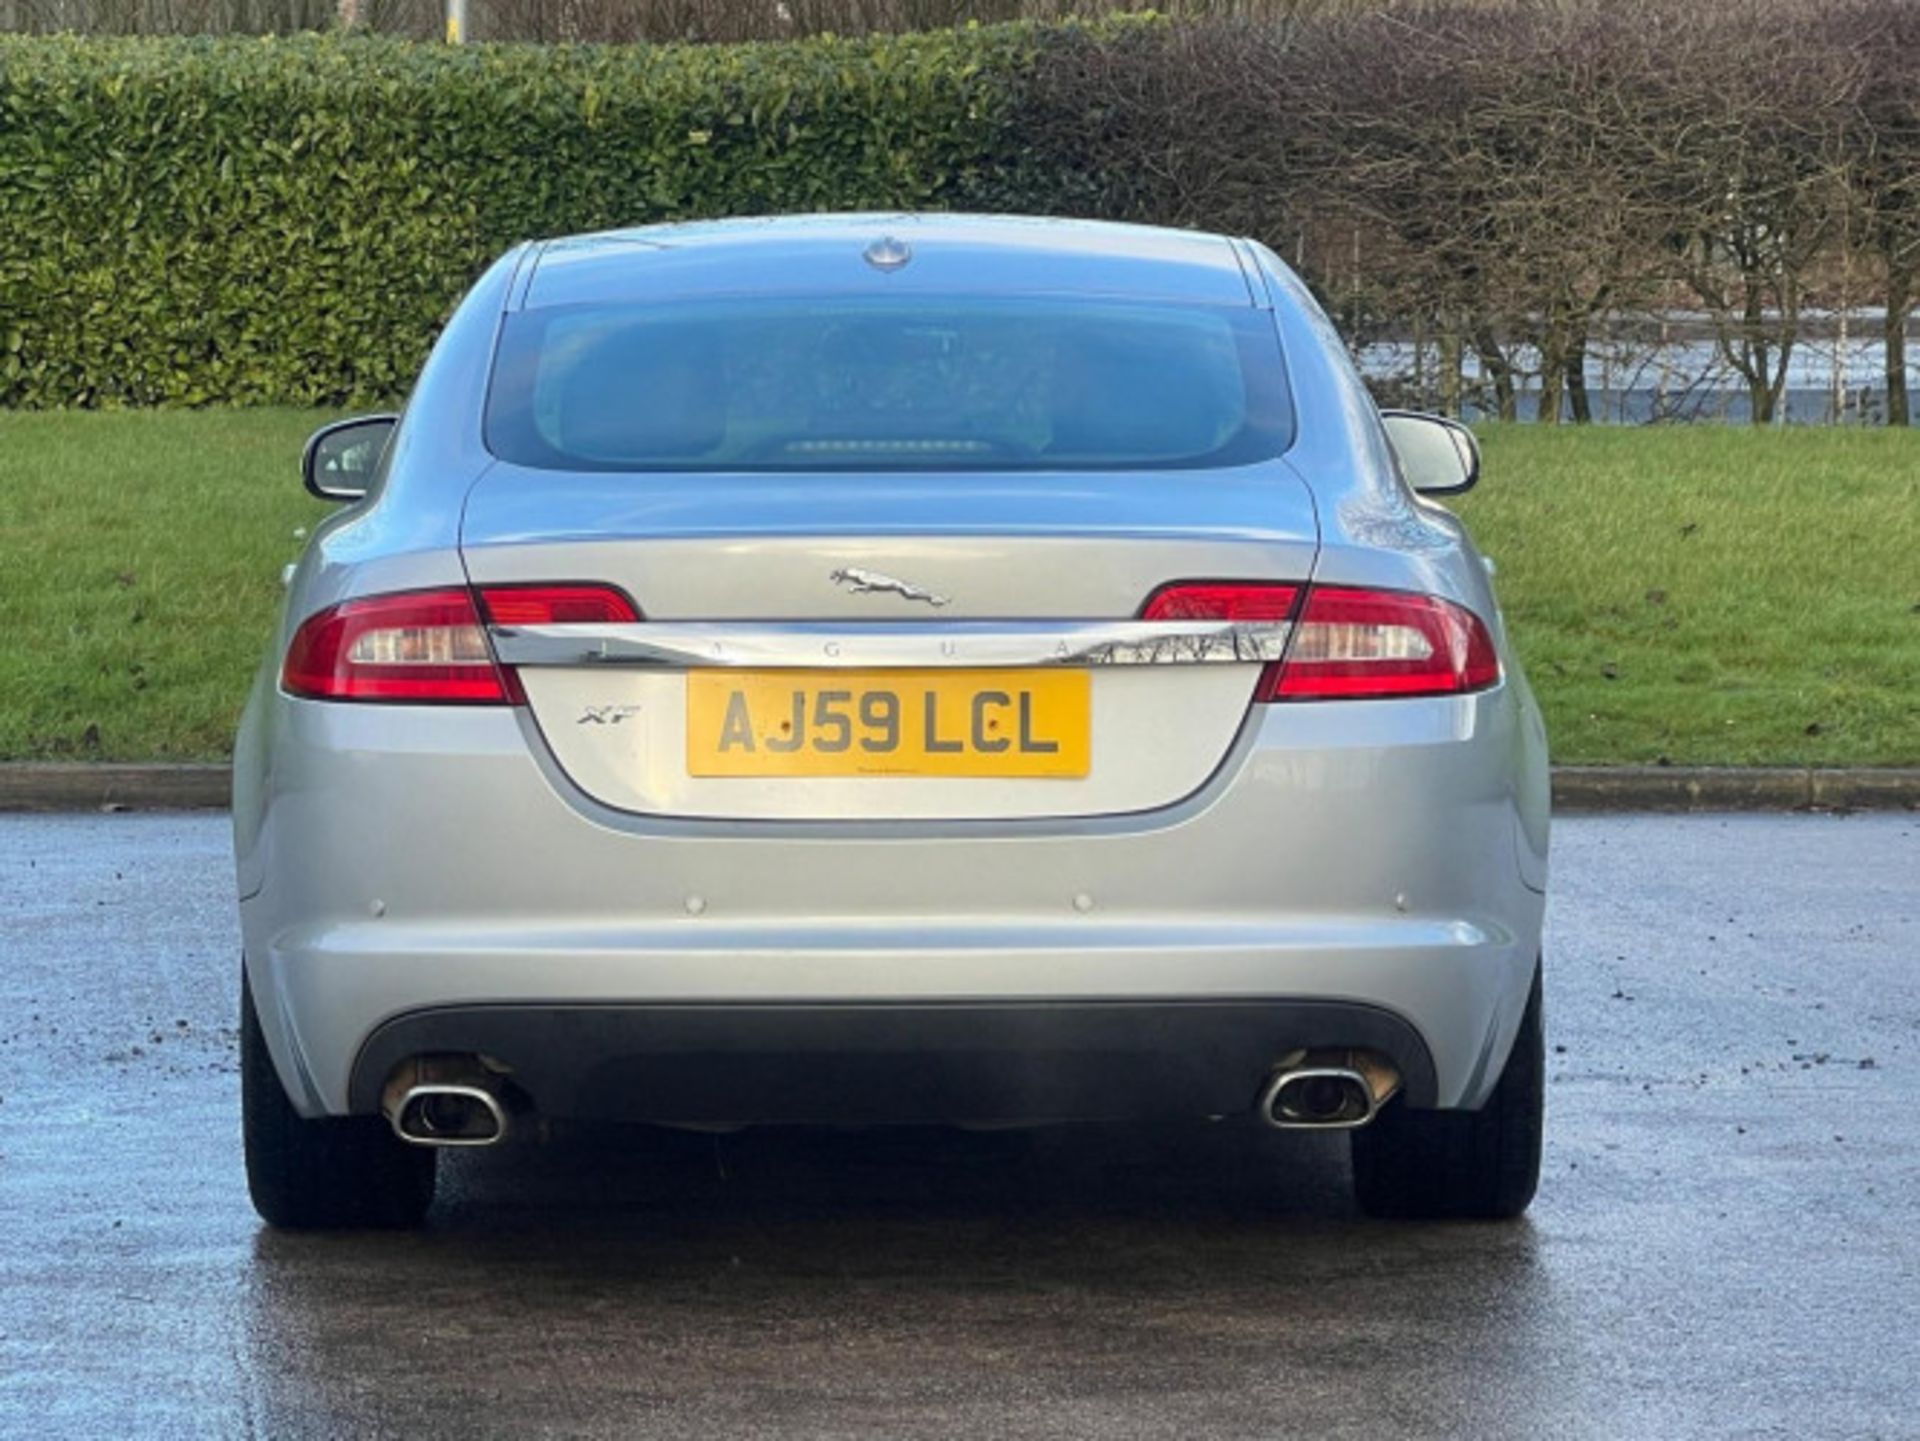 LUXURIOUS JAGUAR XF 3.0D V6 LUXURY 4DR AUTOMATIC SALOON >>--NO VAT ON HAMMER--<< - Image 115 of 118